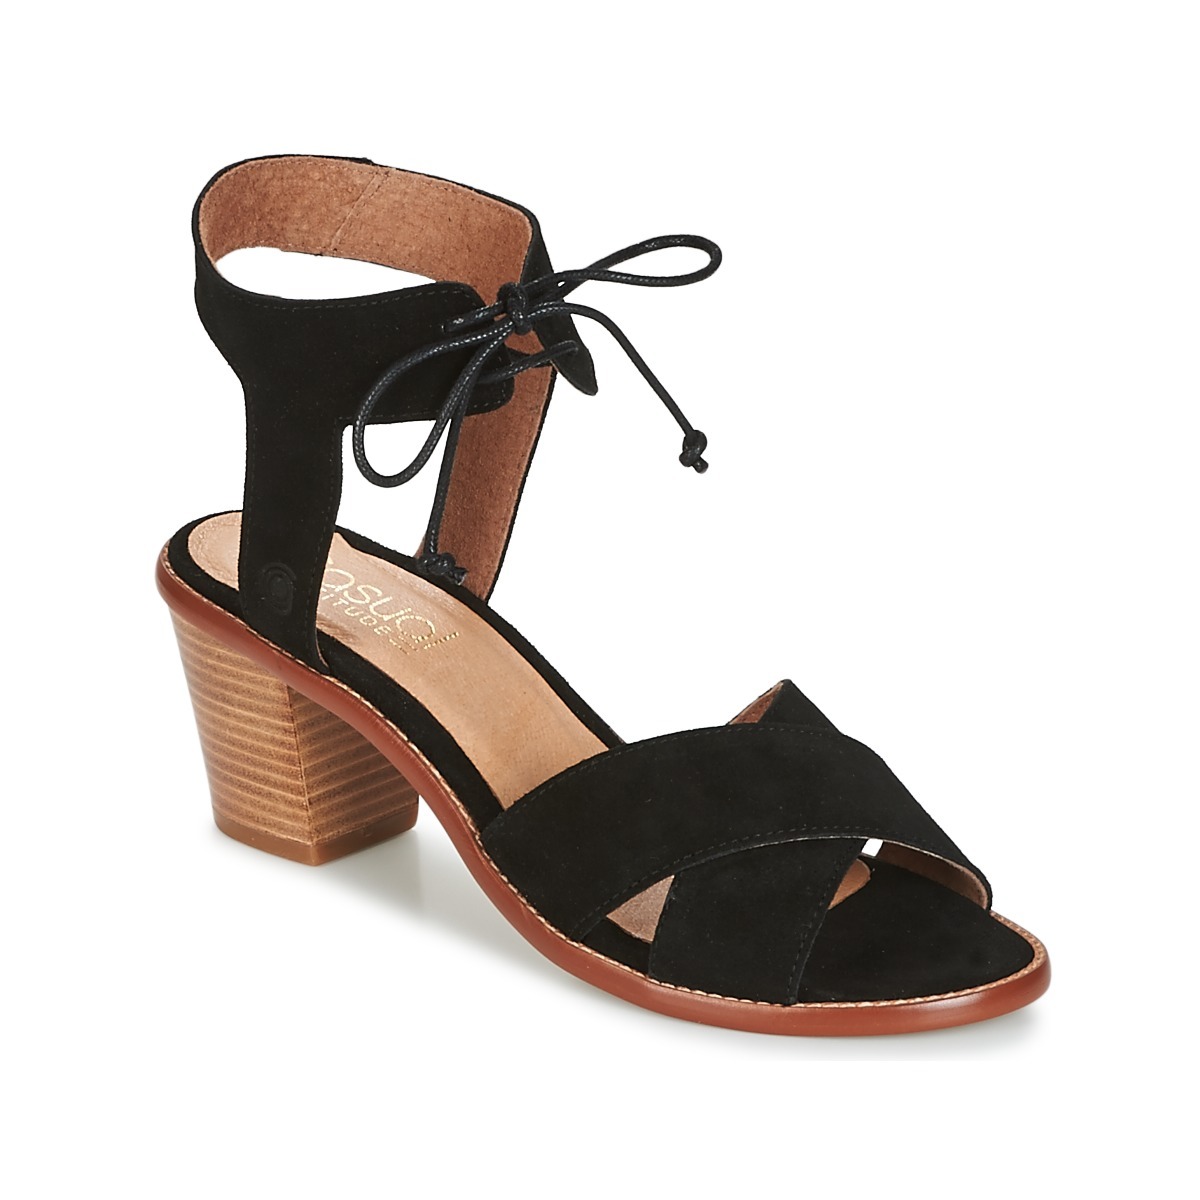 Casualtitude - Black Sandals for Woman at Spartoo GOOFASH